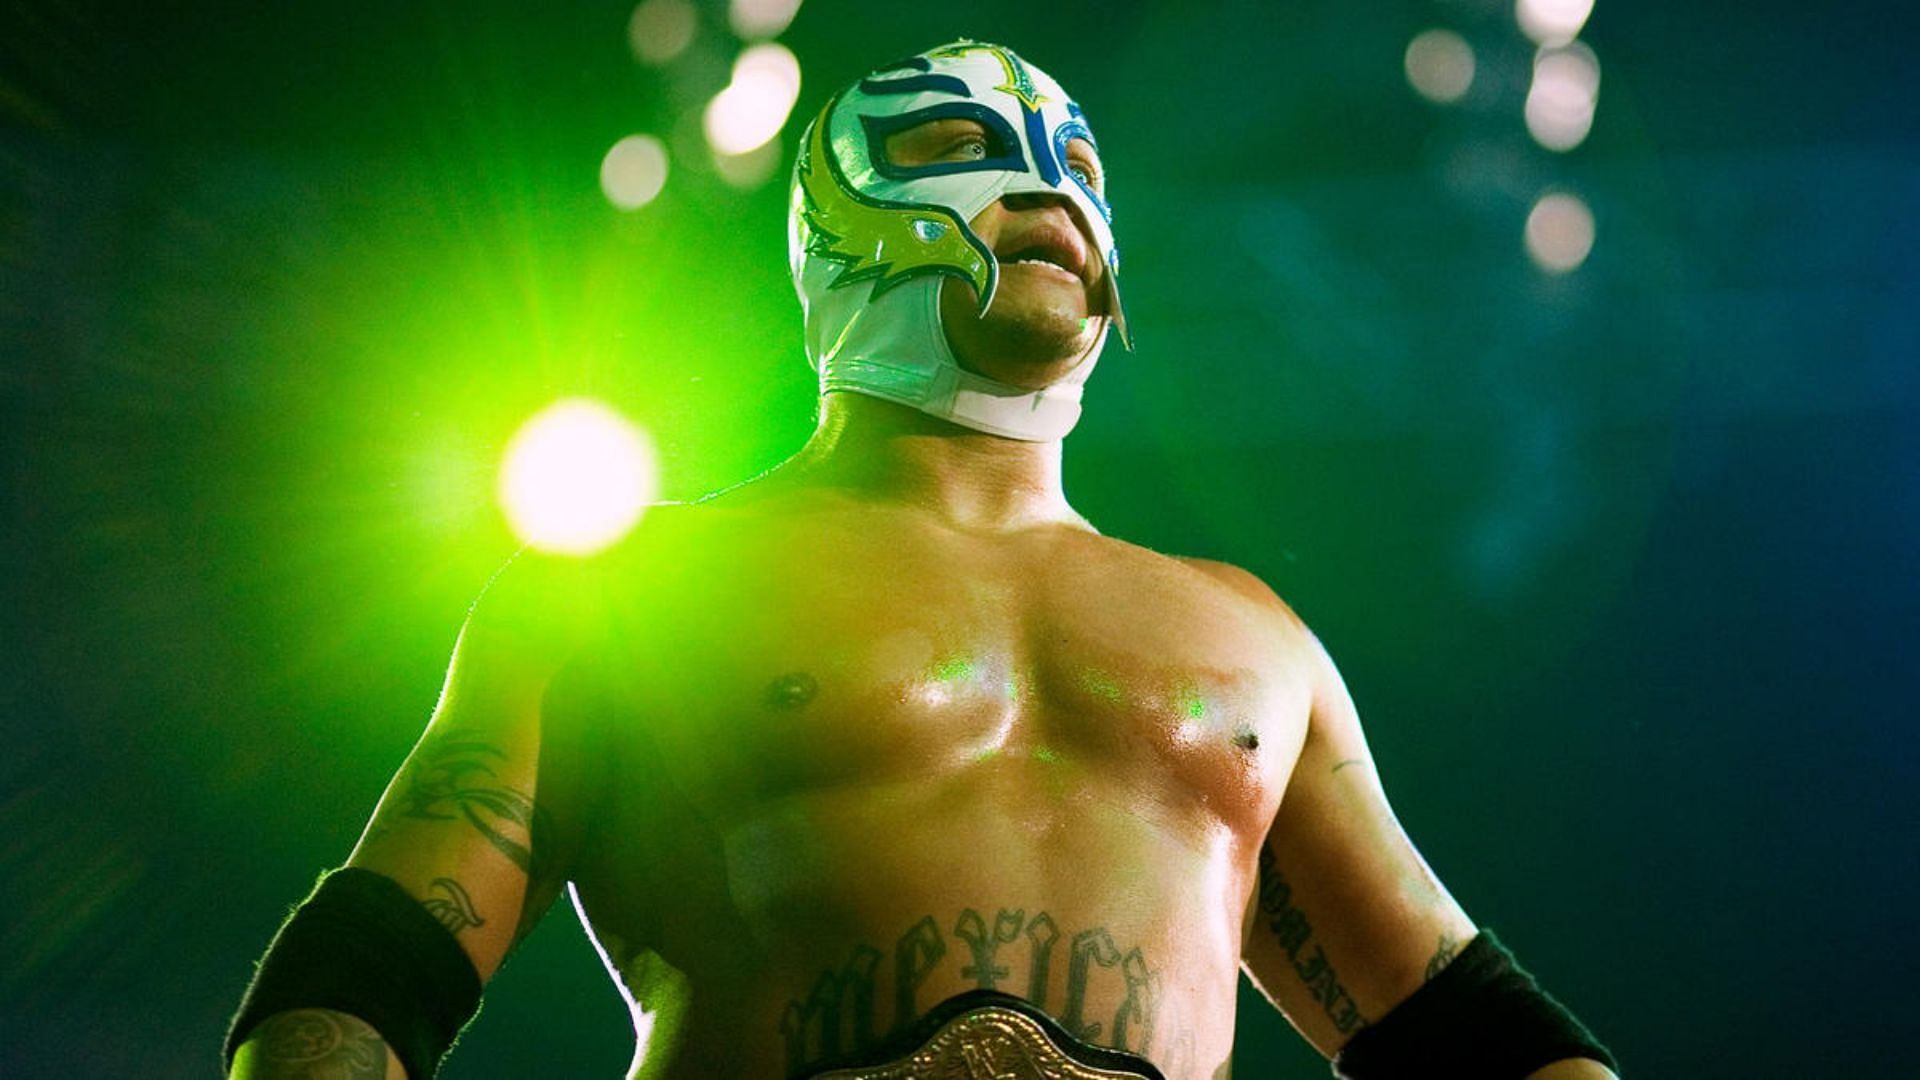 Rey Mysterio is one of the most respected wrestlers in the world